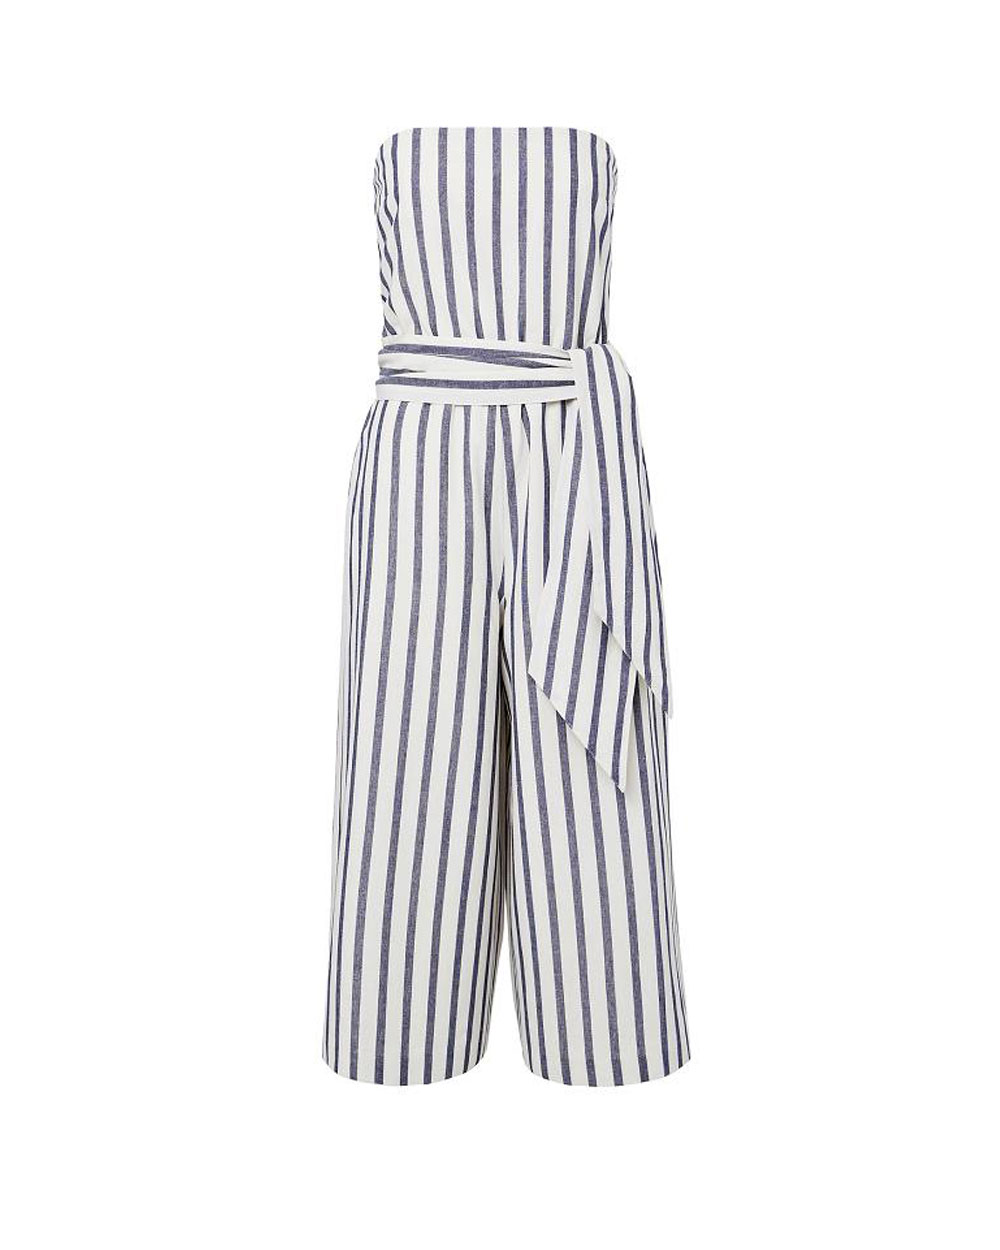 THE JUMPSUIT: AUD $139.95 from Seed Heritage